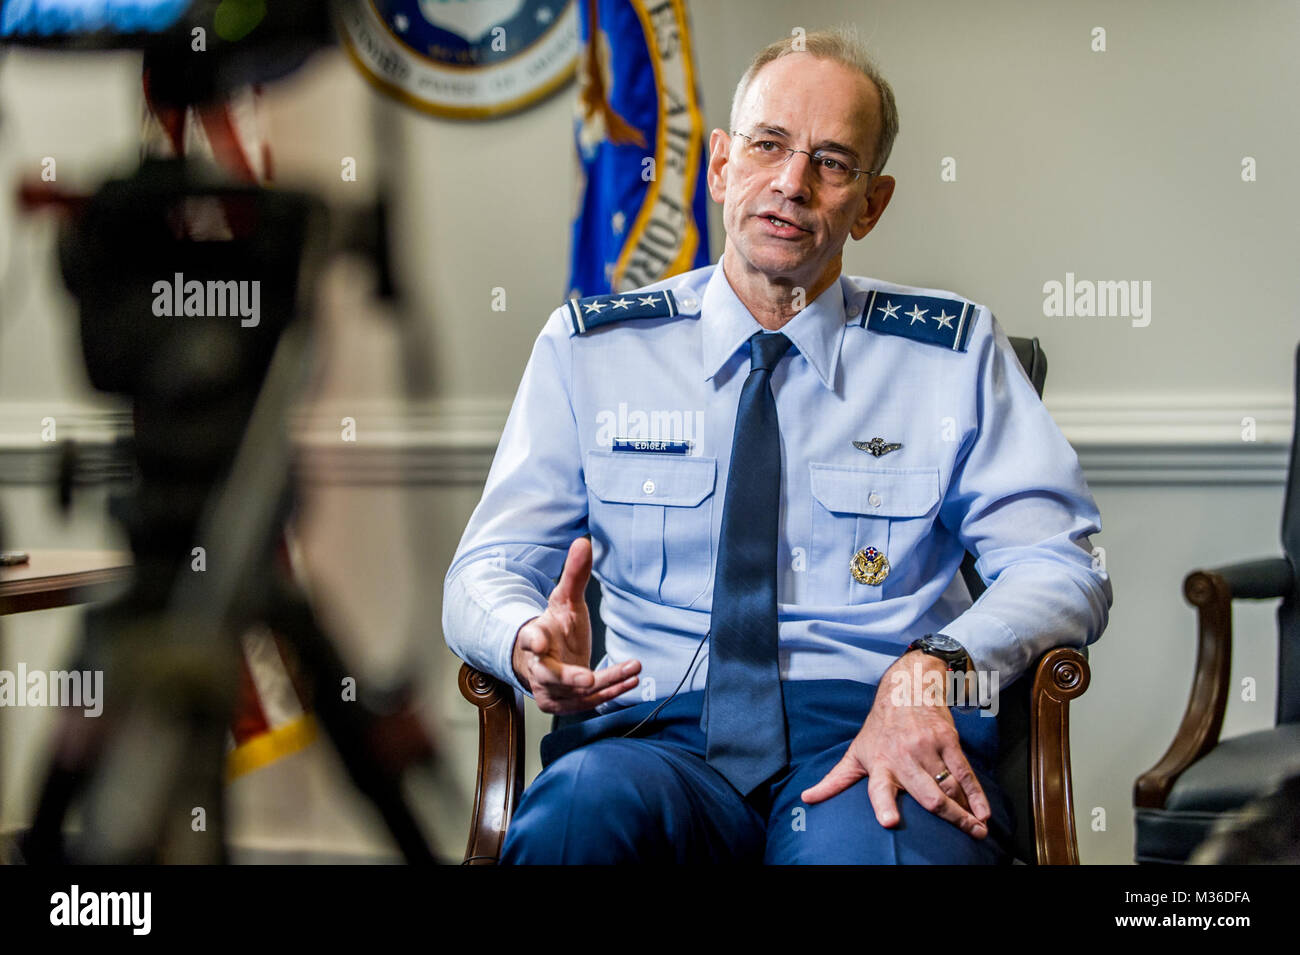 Lt. Gen. (Dr.) Mark A. Ediger, the Surgeon General of the Air Force, speaks with a reporter from Airman Magazine during an interview at Headquarters U.S. Air Force, The Pentagon in Arlington, Va., Jul 8, 2016.  General Ediger serves as functional manager of the U.S. Air Force Medical Service and advises the Secretary of the Air Force and Air Force Chief of Staff, as well as the Assistant Secretary of Defense for Health Affairs on matters pertaining to the medical aspects of the air expeditionary force and the health of Air Force personnel. (U.S. Air Force photo by J.M. Eddins Jr.) 160708-F-LW8 Stock Photo